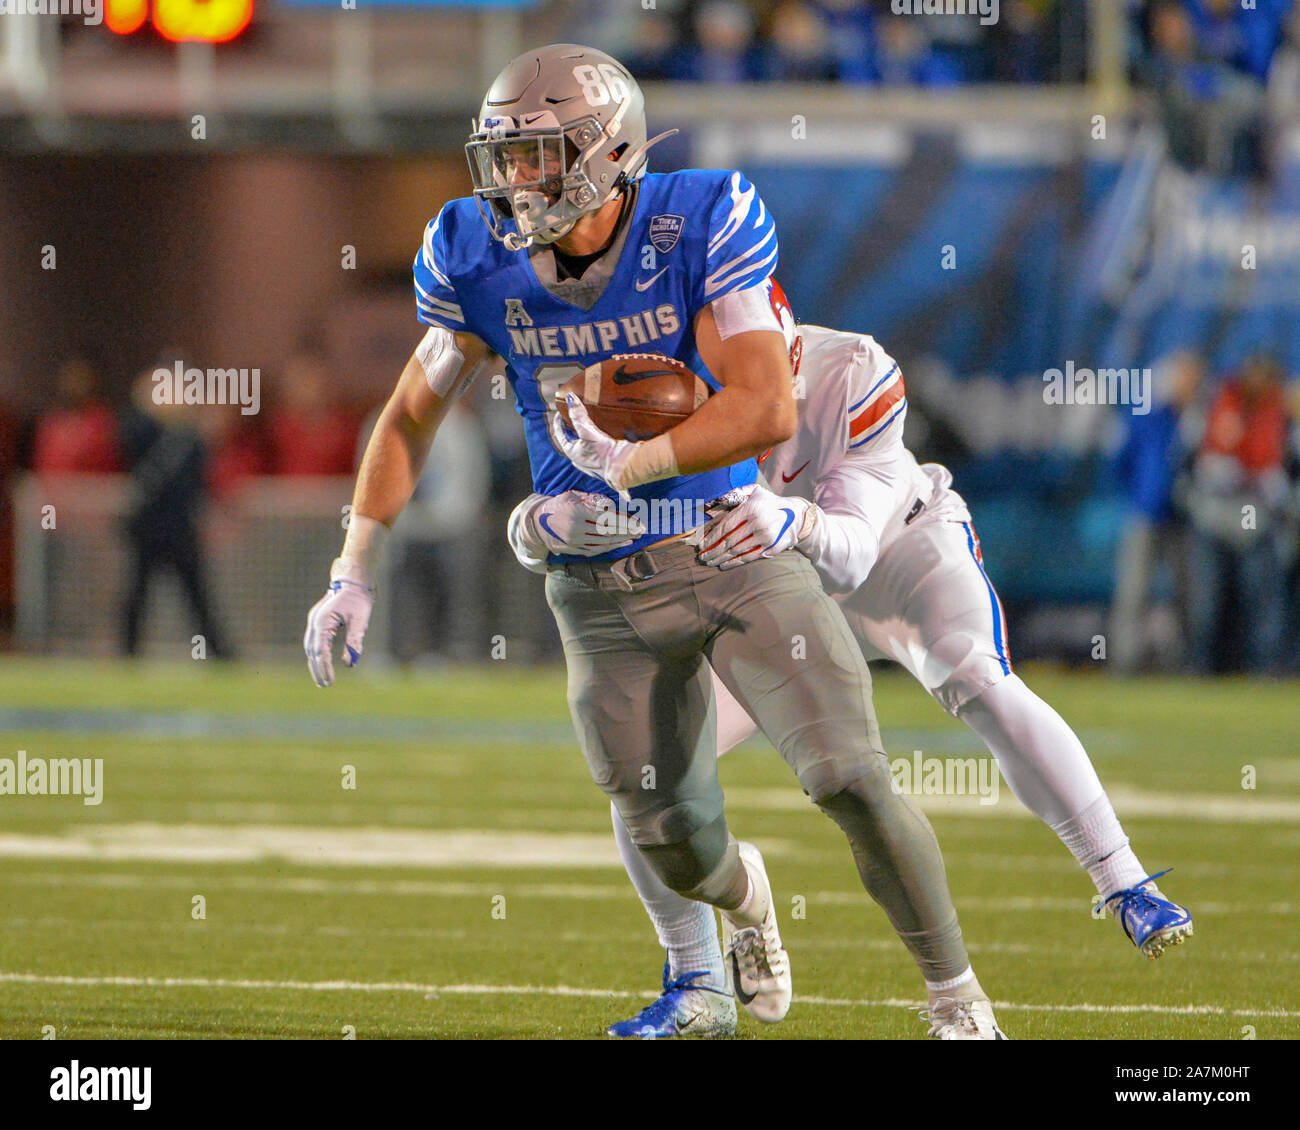 November 02, 2019: Memphis tight end, Joey Magnifico (86), runs the ball as the SMU defense tries to pull him down, during the NCAA football game between the SMU Mustangs and the Memphis Tigers at Liberty Bowl Stadium in Memphis, TN. Kevin Langley/Sports South Media/CSM Stock Photo